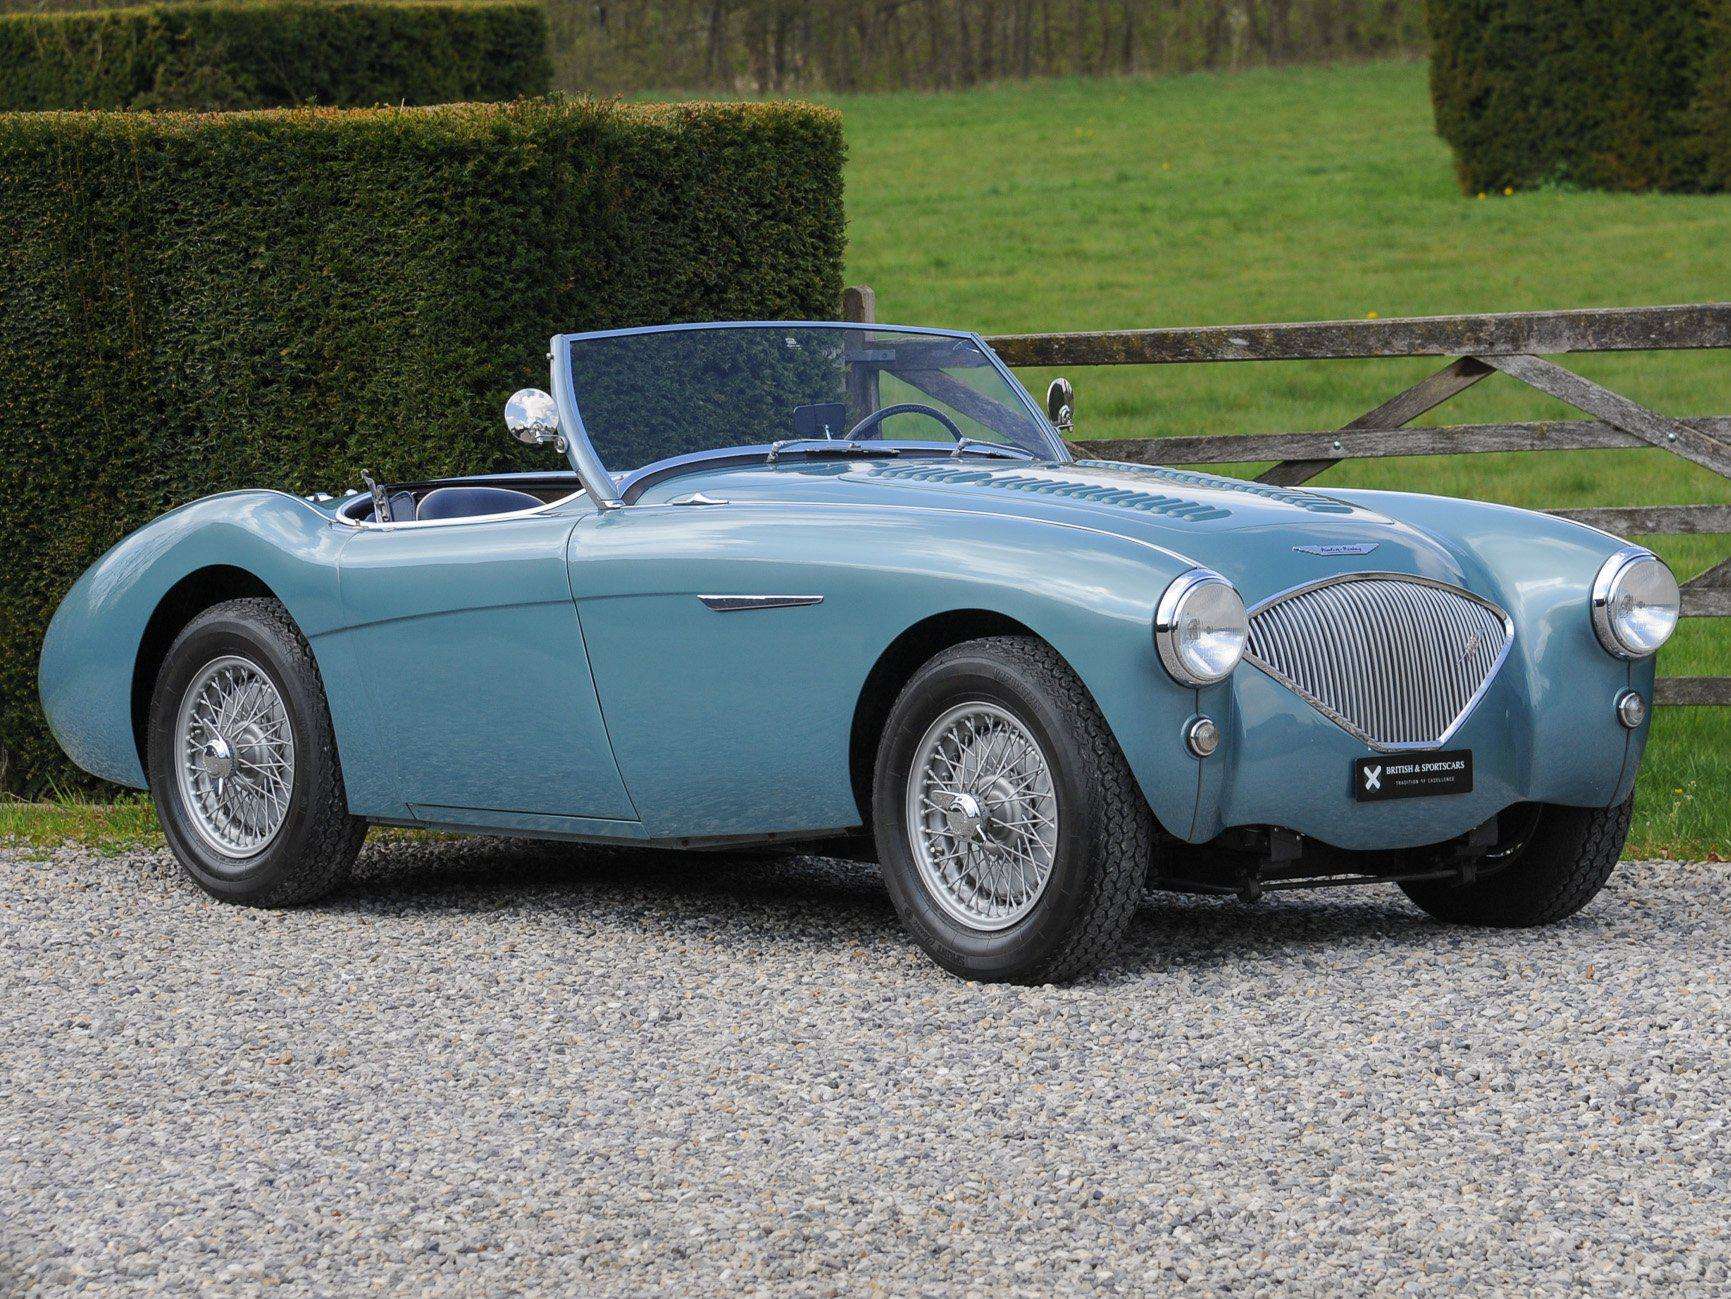 Austin Healey Convertible in Blue used in Overijse for € 92,000.-